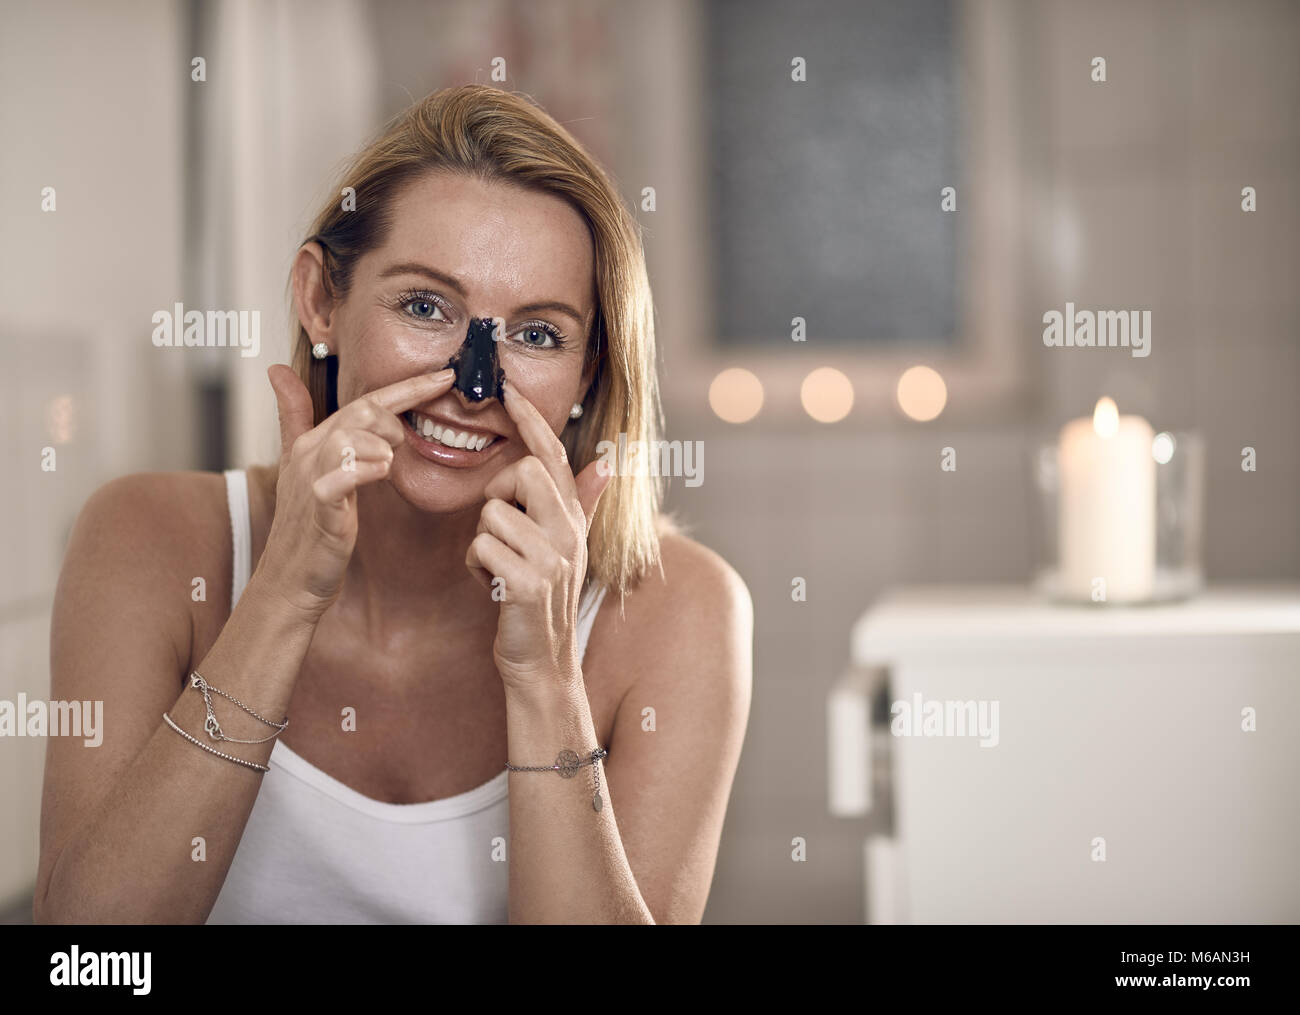 Attractive middle-aged blond woman applying an anti-aging face mask to her nose in a bathroom with burning candles in a concept of beauty, skincare an Stock Photo